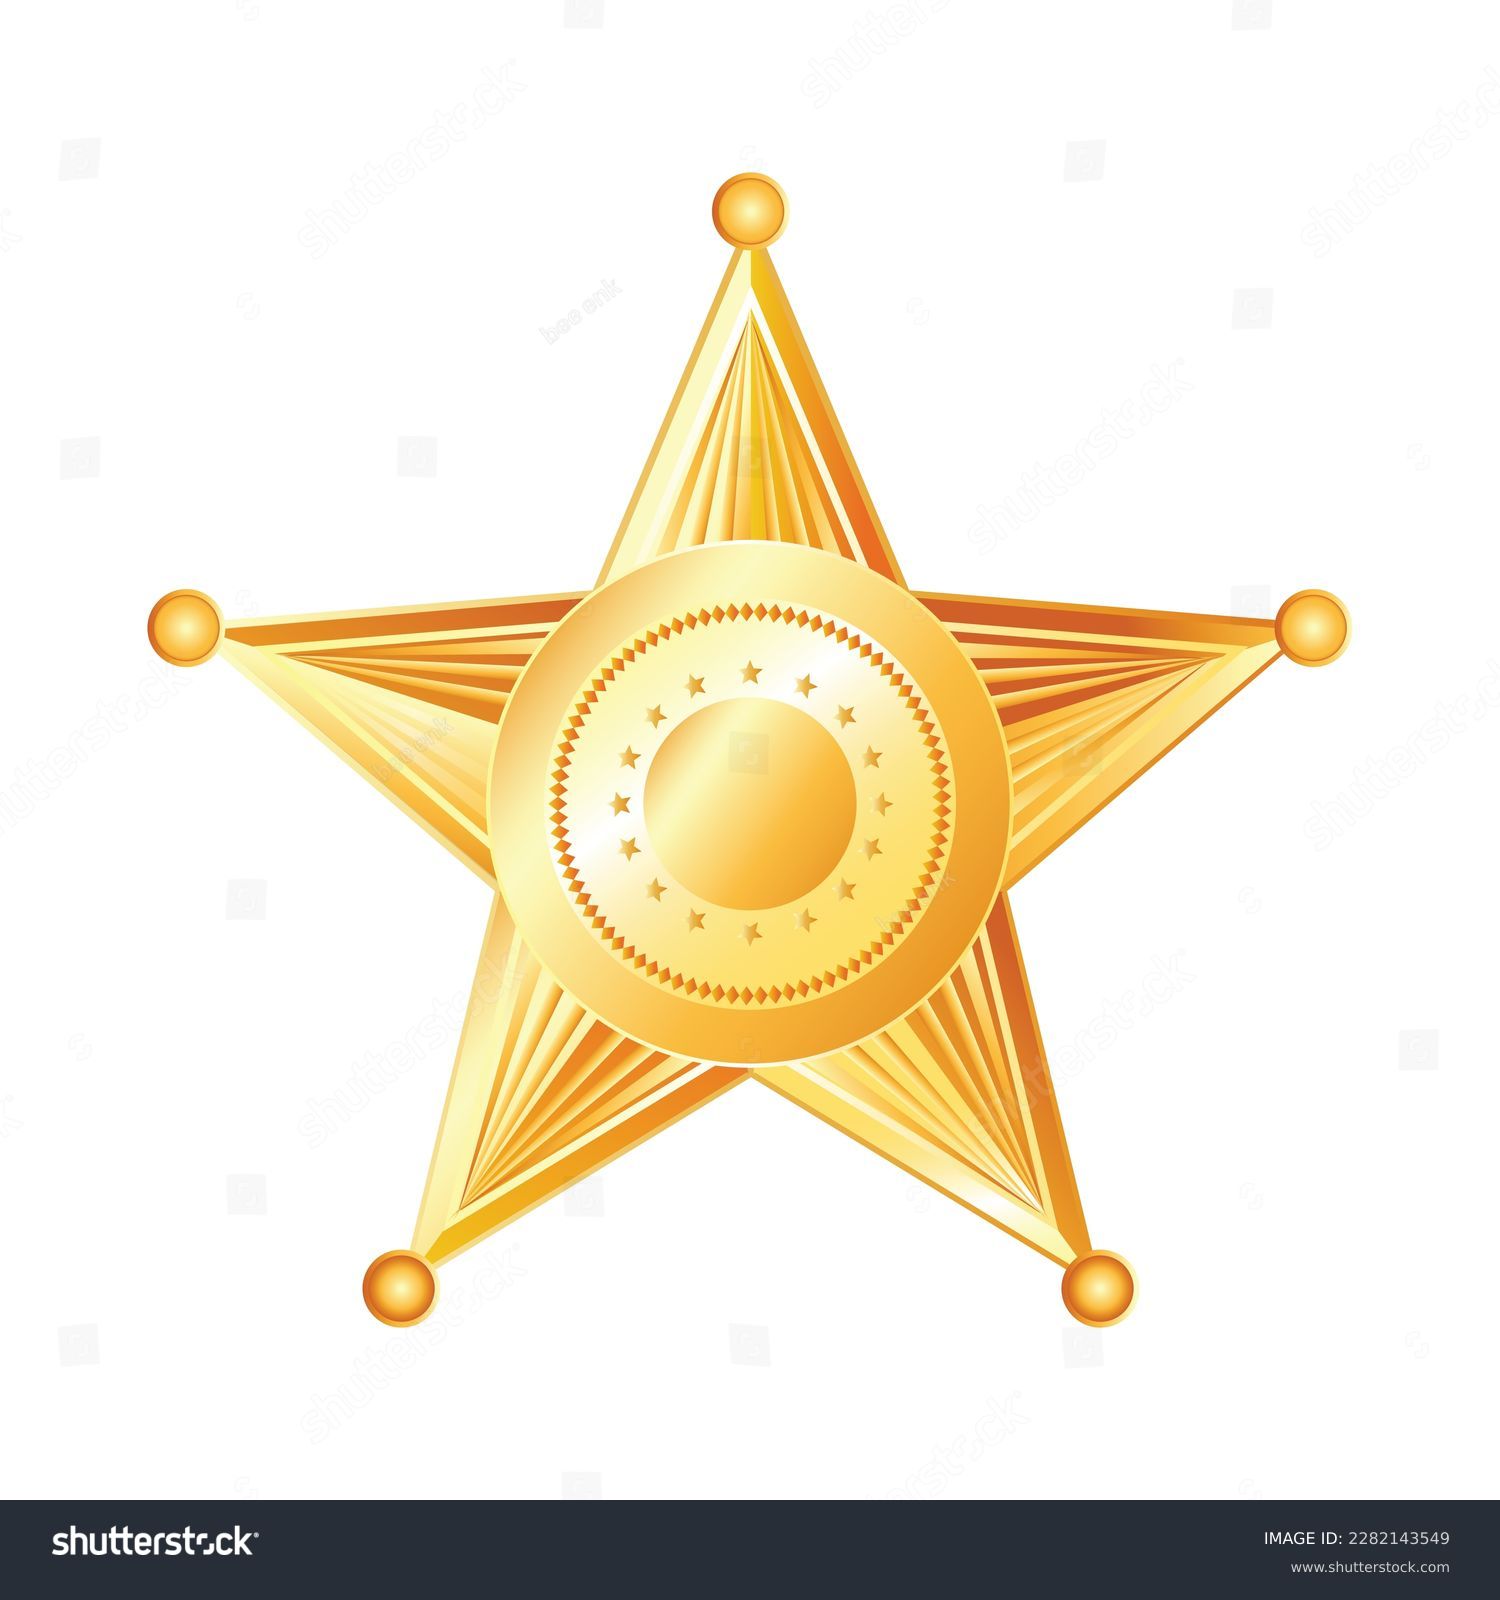 SVG of vector golden stars. flat image of a bright yellow star. five pointed star. sheriff's star svg